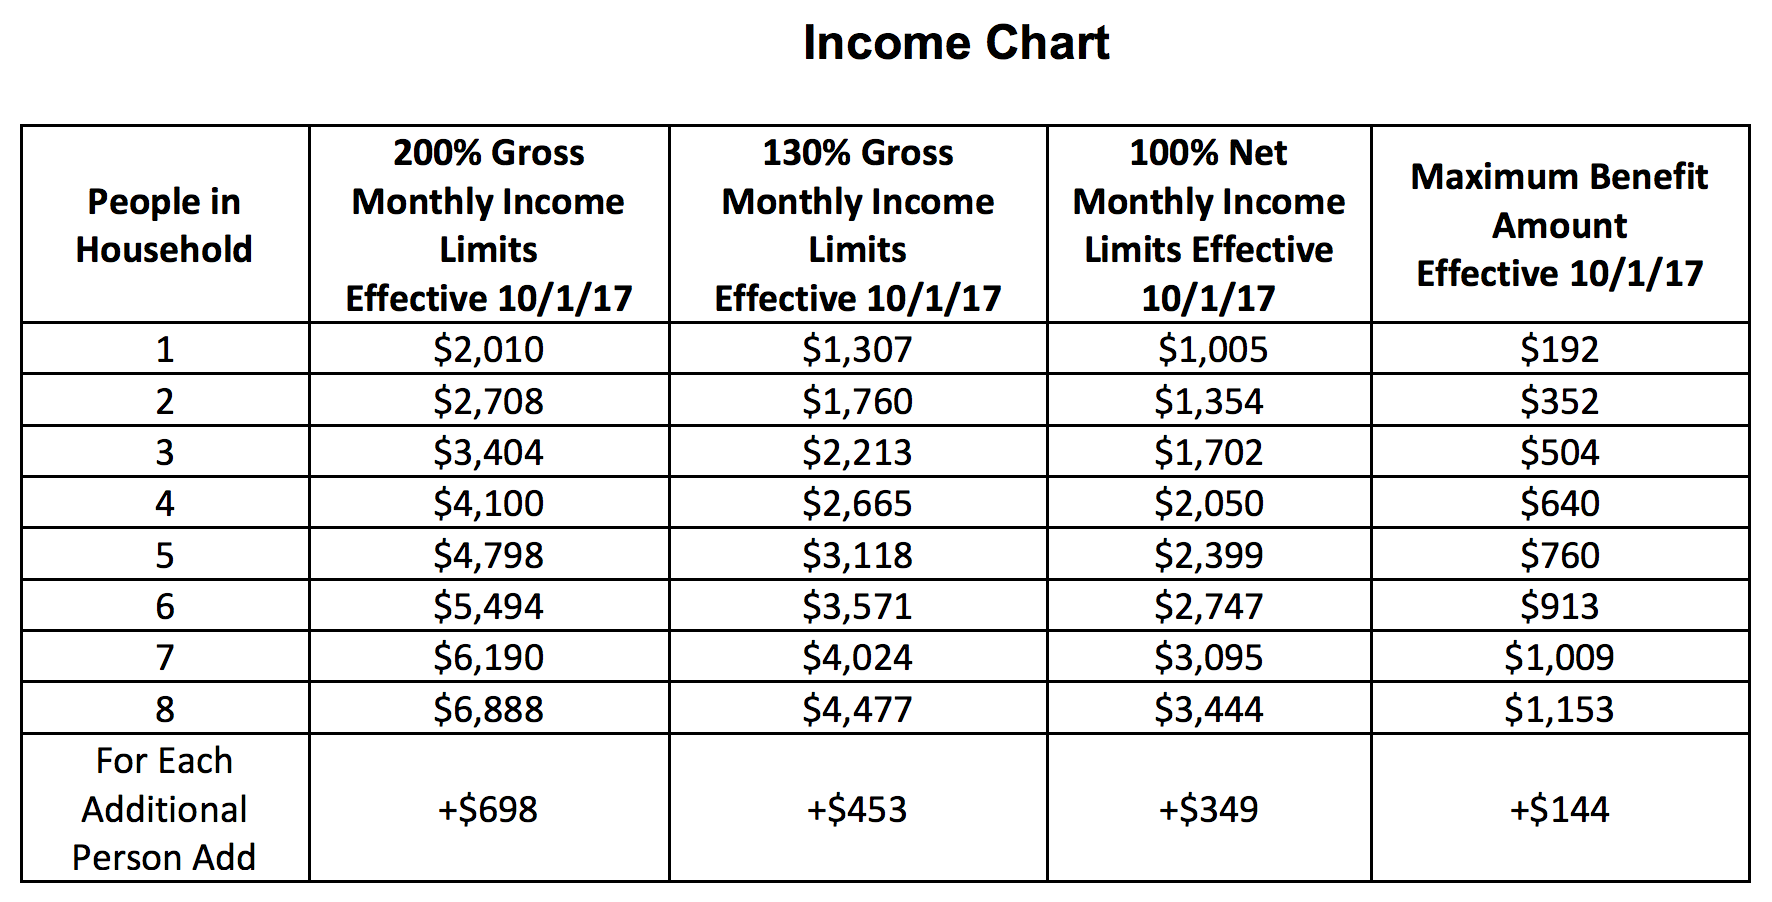 Texas Snap Benefits Income Chart